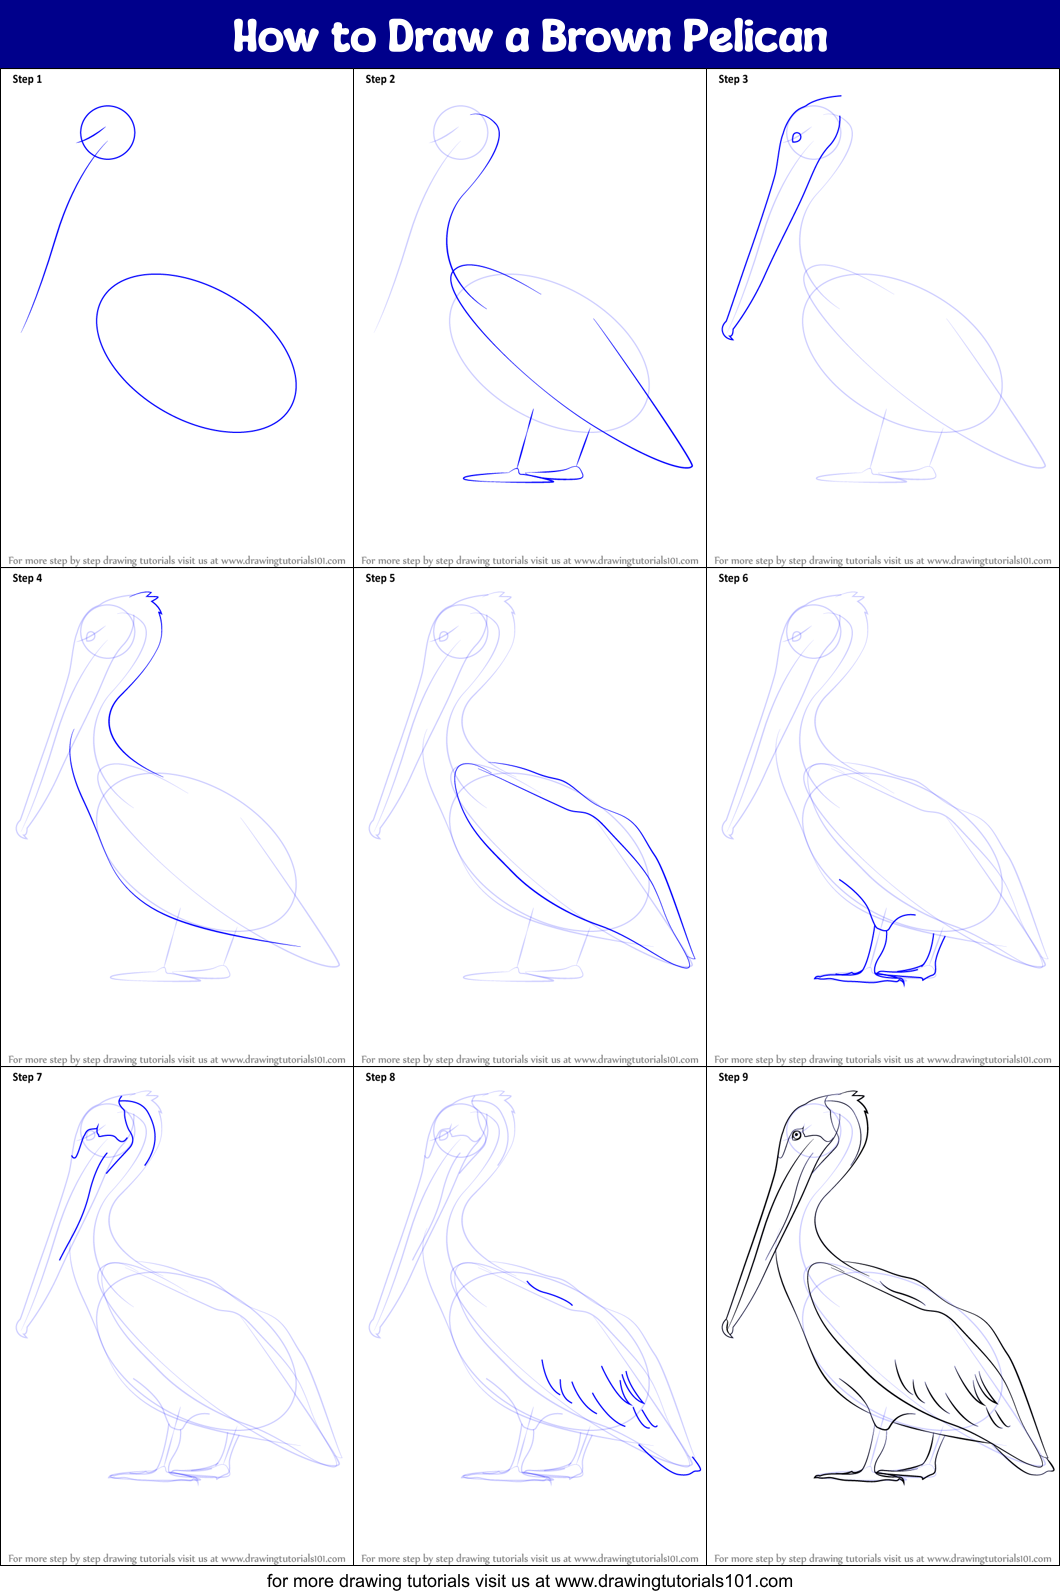 How to Draw a Brown Pelican printable step by step drawing sheet